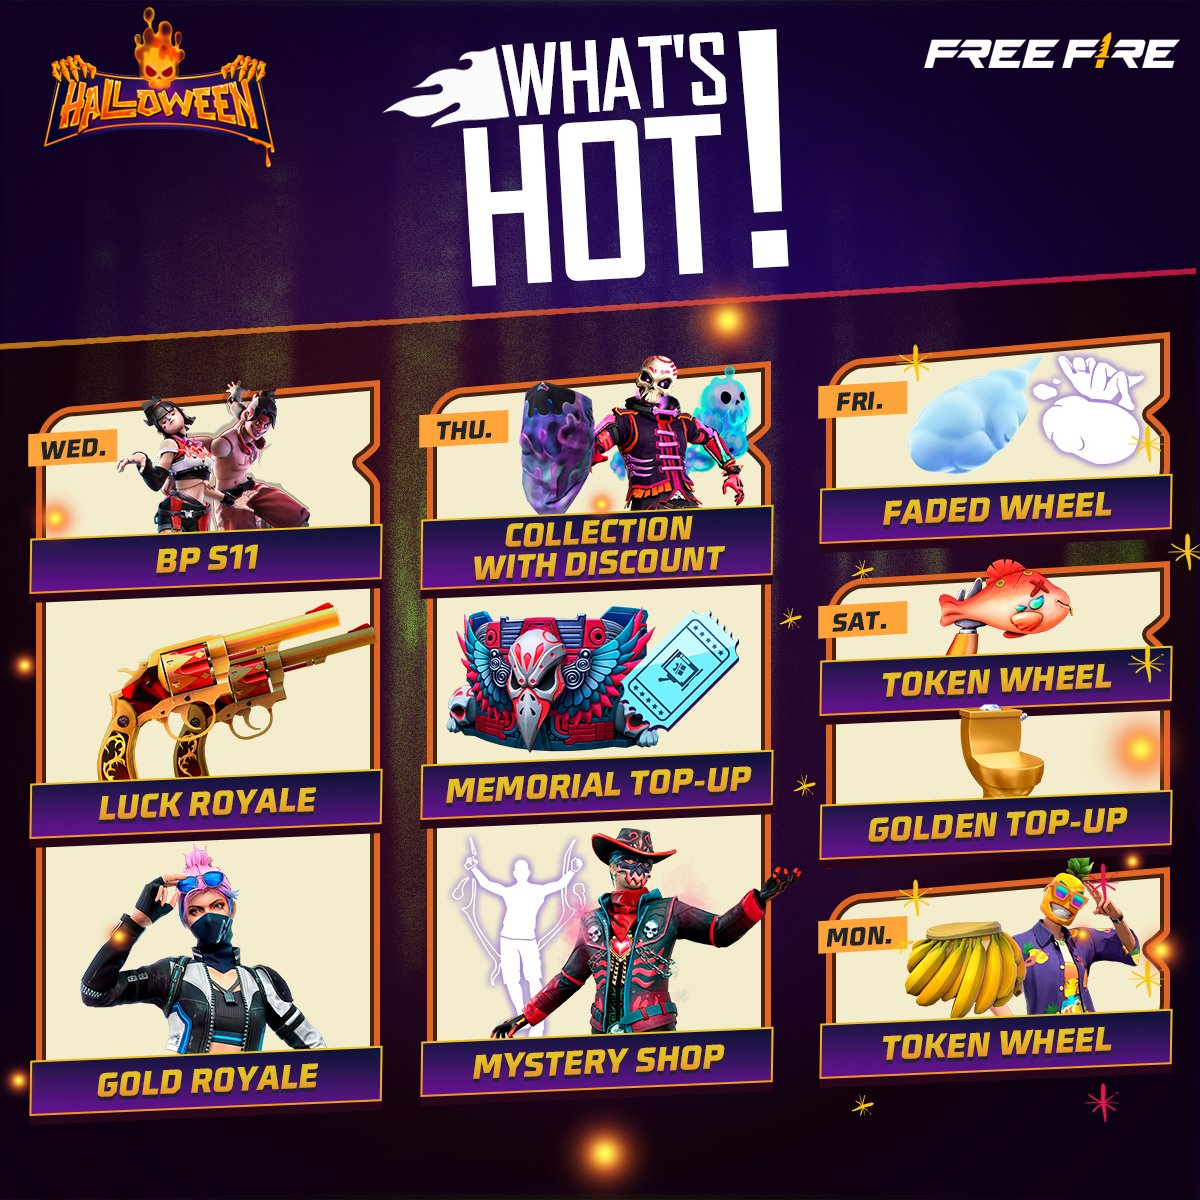 Garena Free Fire Max redeem codes for Oct 21, 2023: Grab daily free rewards